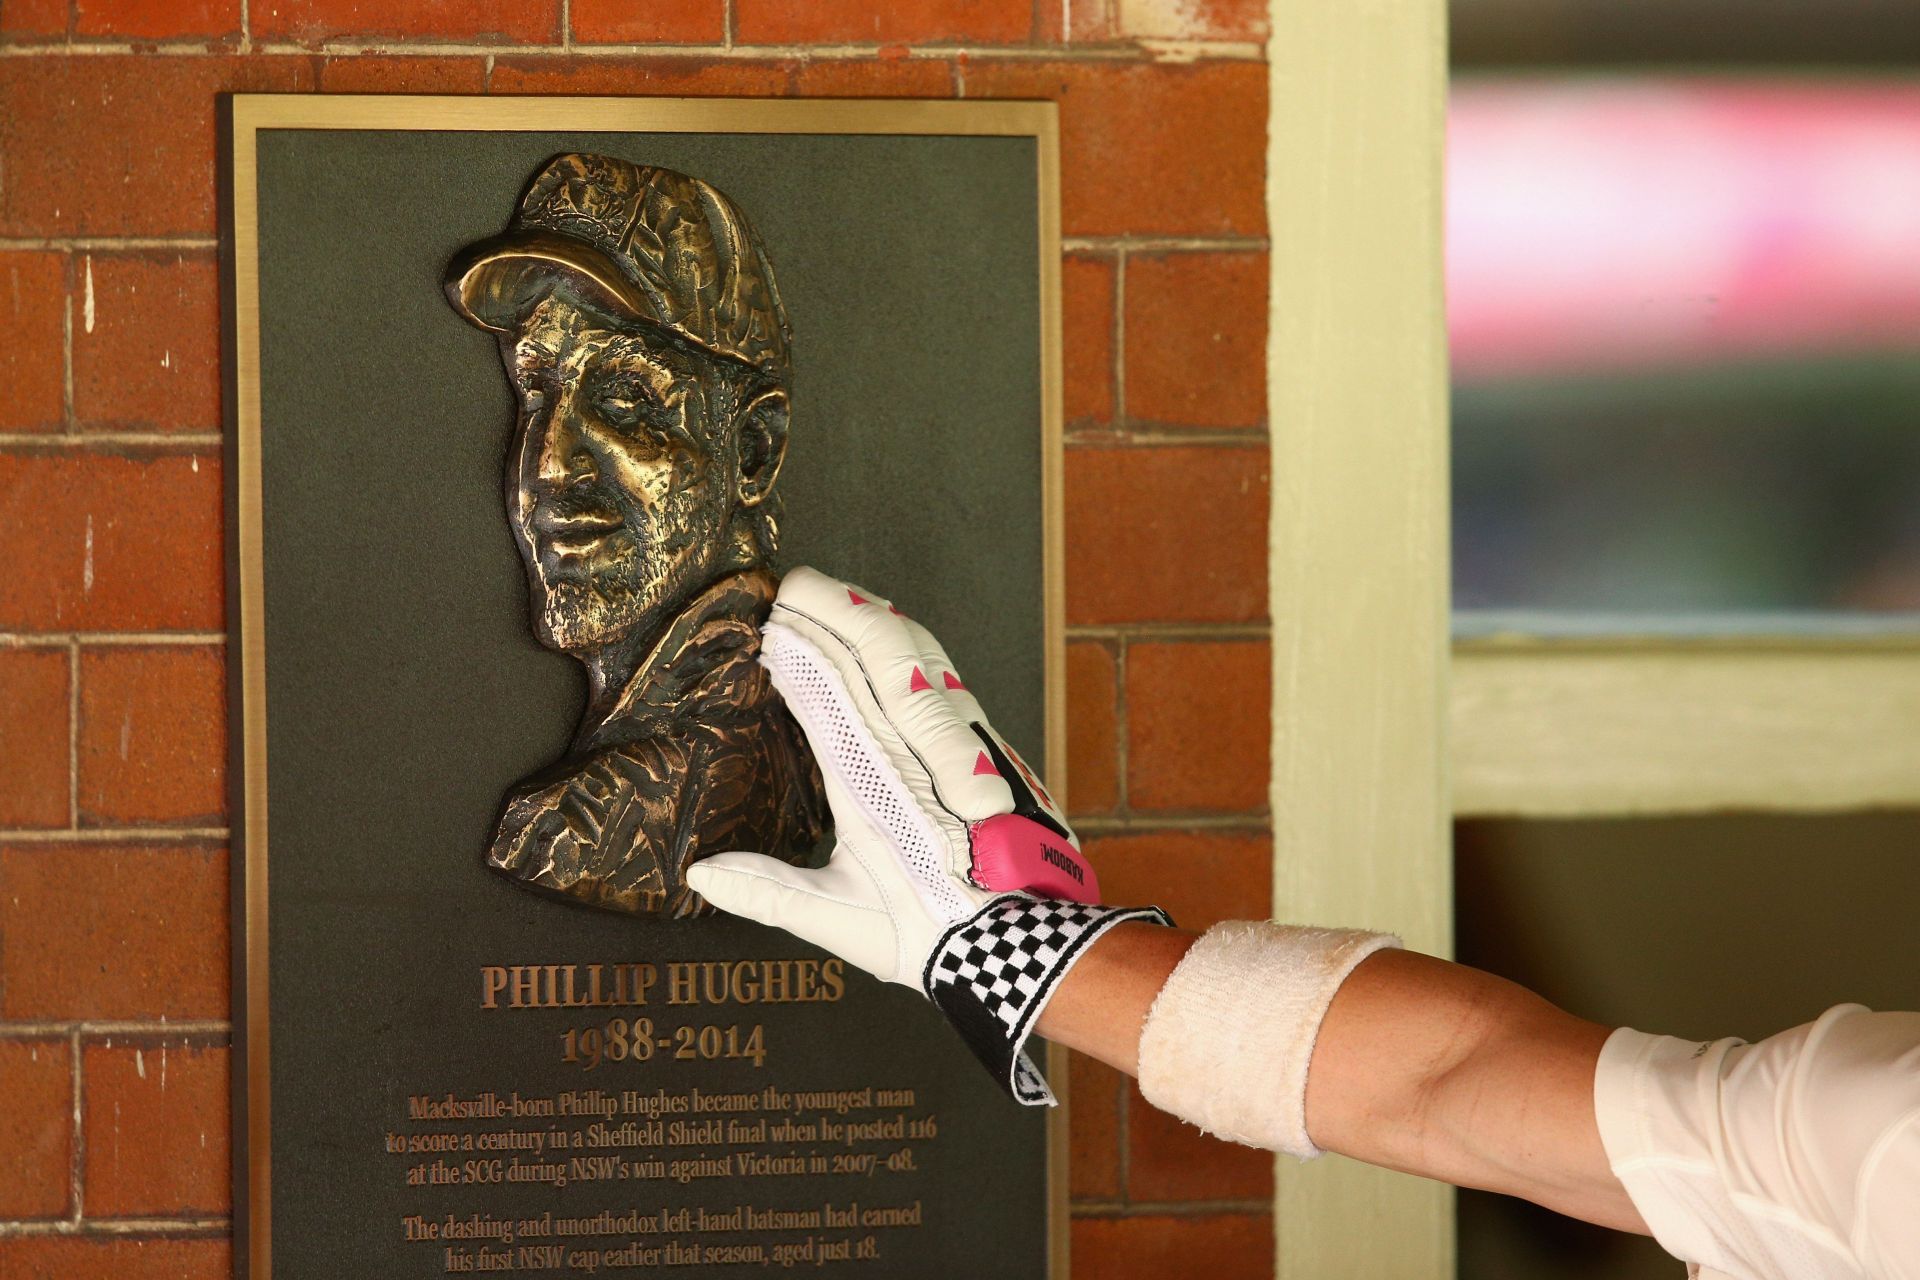 David Warner touches a bronze plaque tributing Phillip Hughes as he heads out to bat against India at the SCG